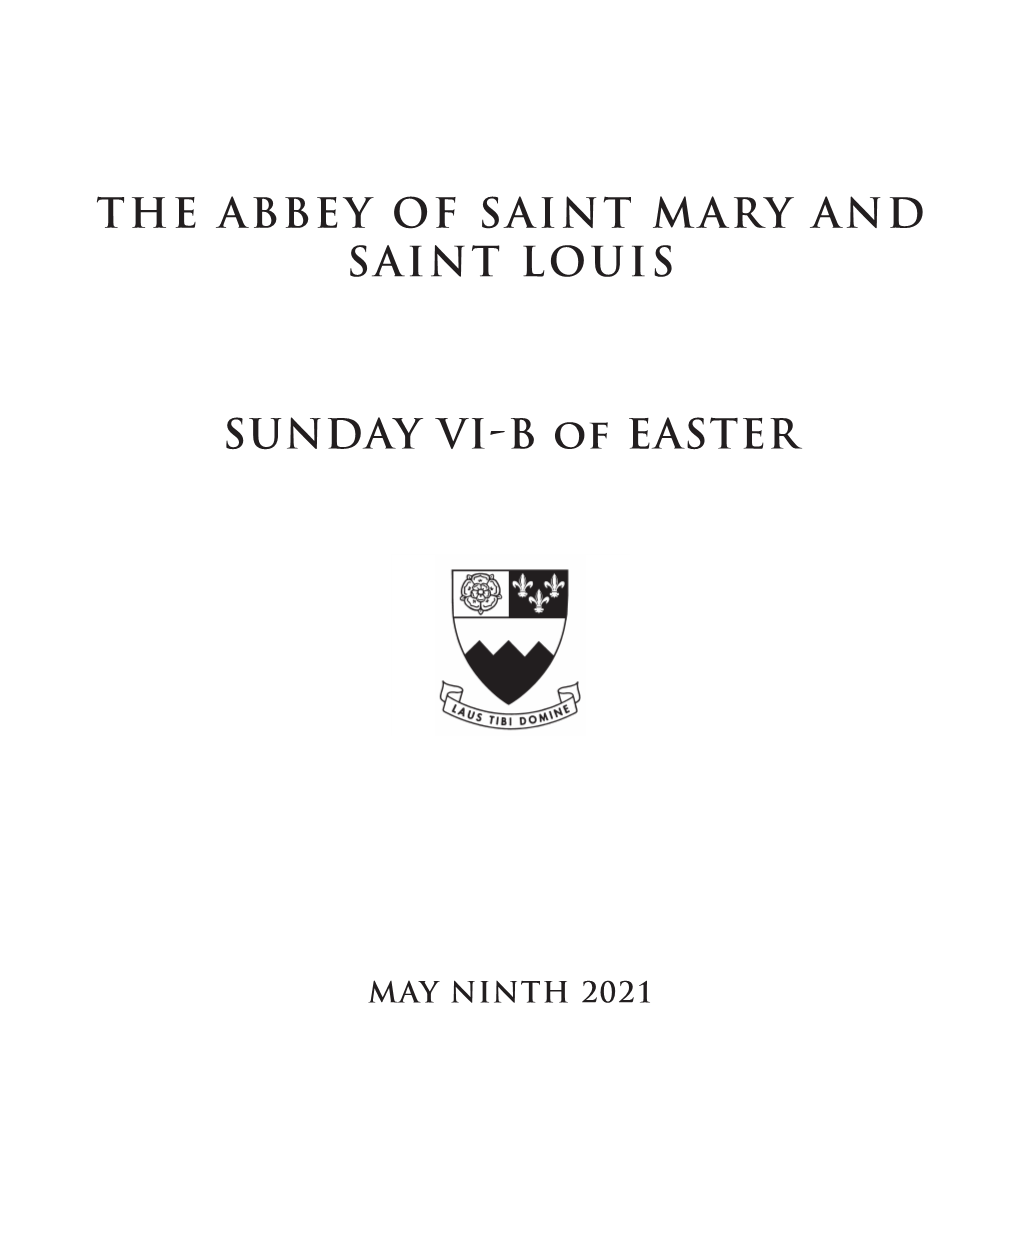 Mass Program Copyright 2021, the Abbey of Saint Mary and Saint Louis